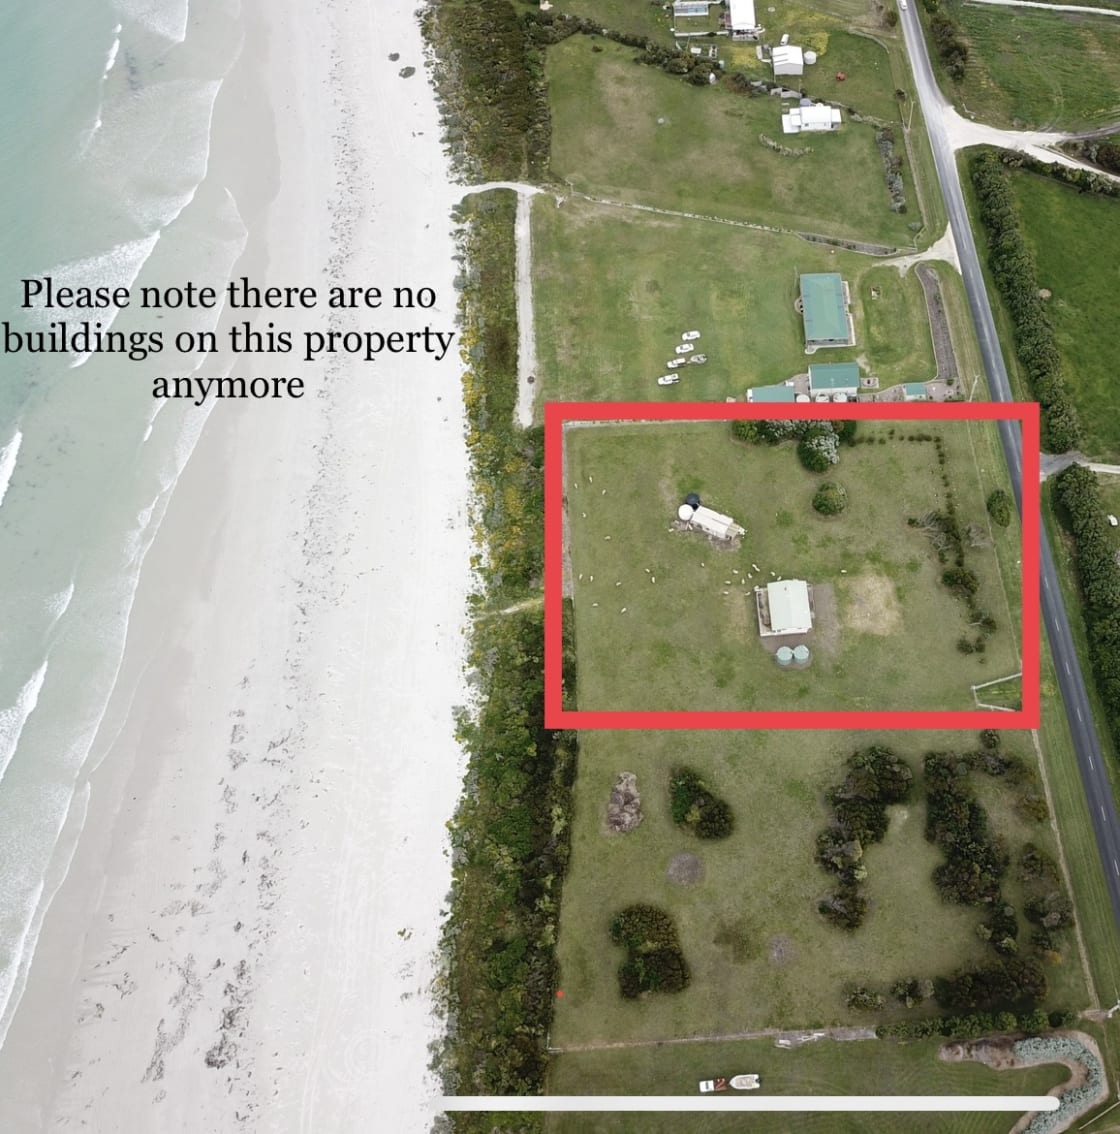 The camp ground is marked in red, please note that there are no building on the property anymore. It is a vacant block of land 